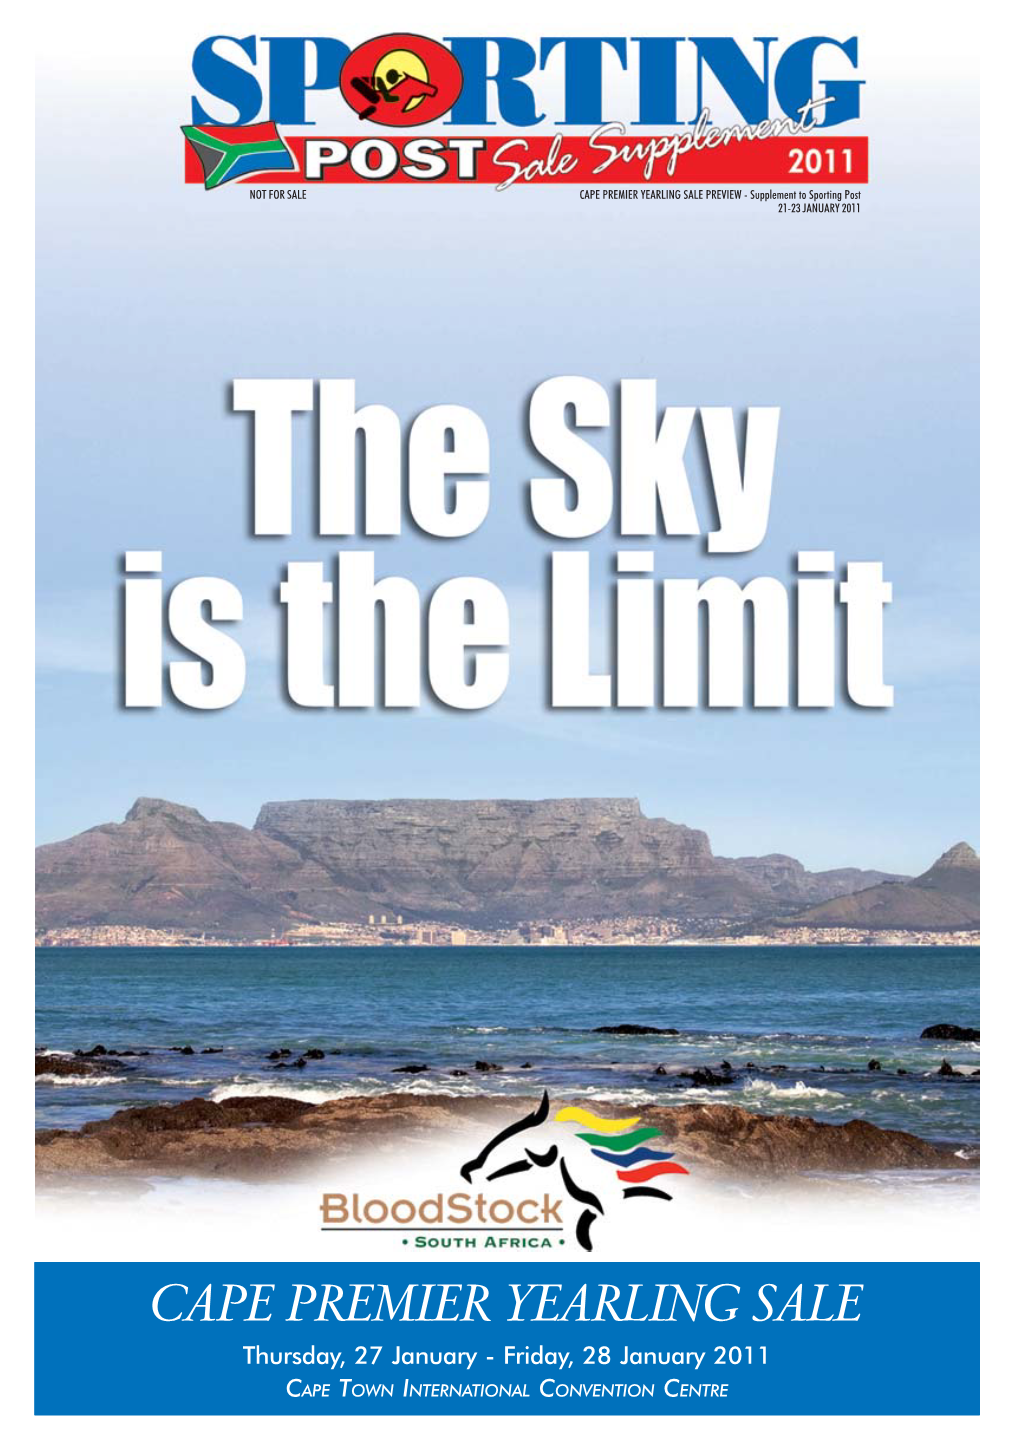 CAPE PREMIER YEARLING SALE PREVIEW - Supplement to Sporting Post 21-23 JANUARY 2011